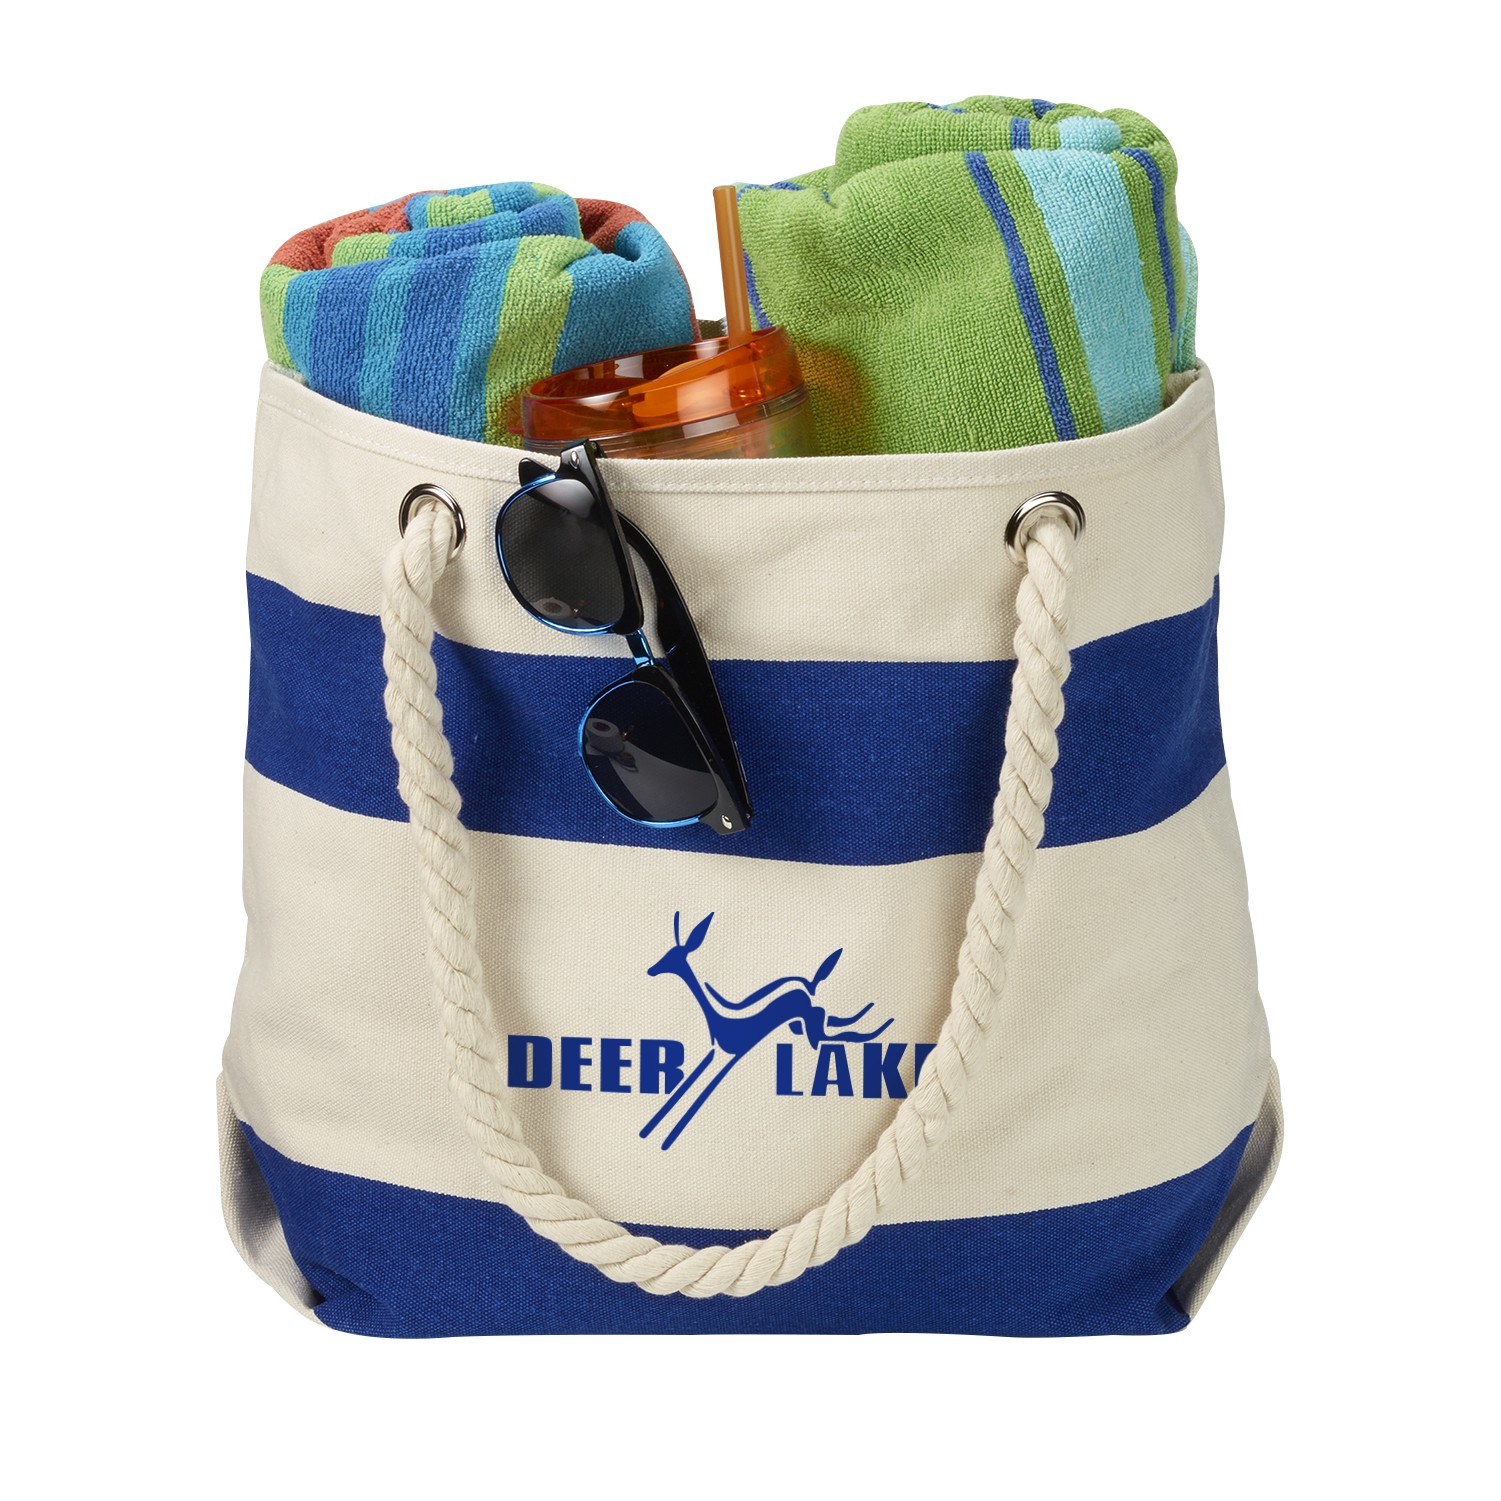 Designer-Cotton-Canvas-Beach-Tote-with-Cotton-Rope-Handle